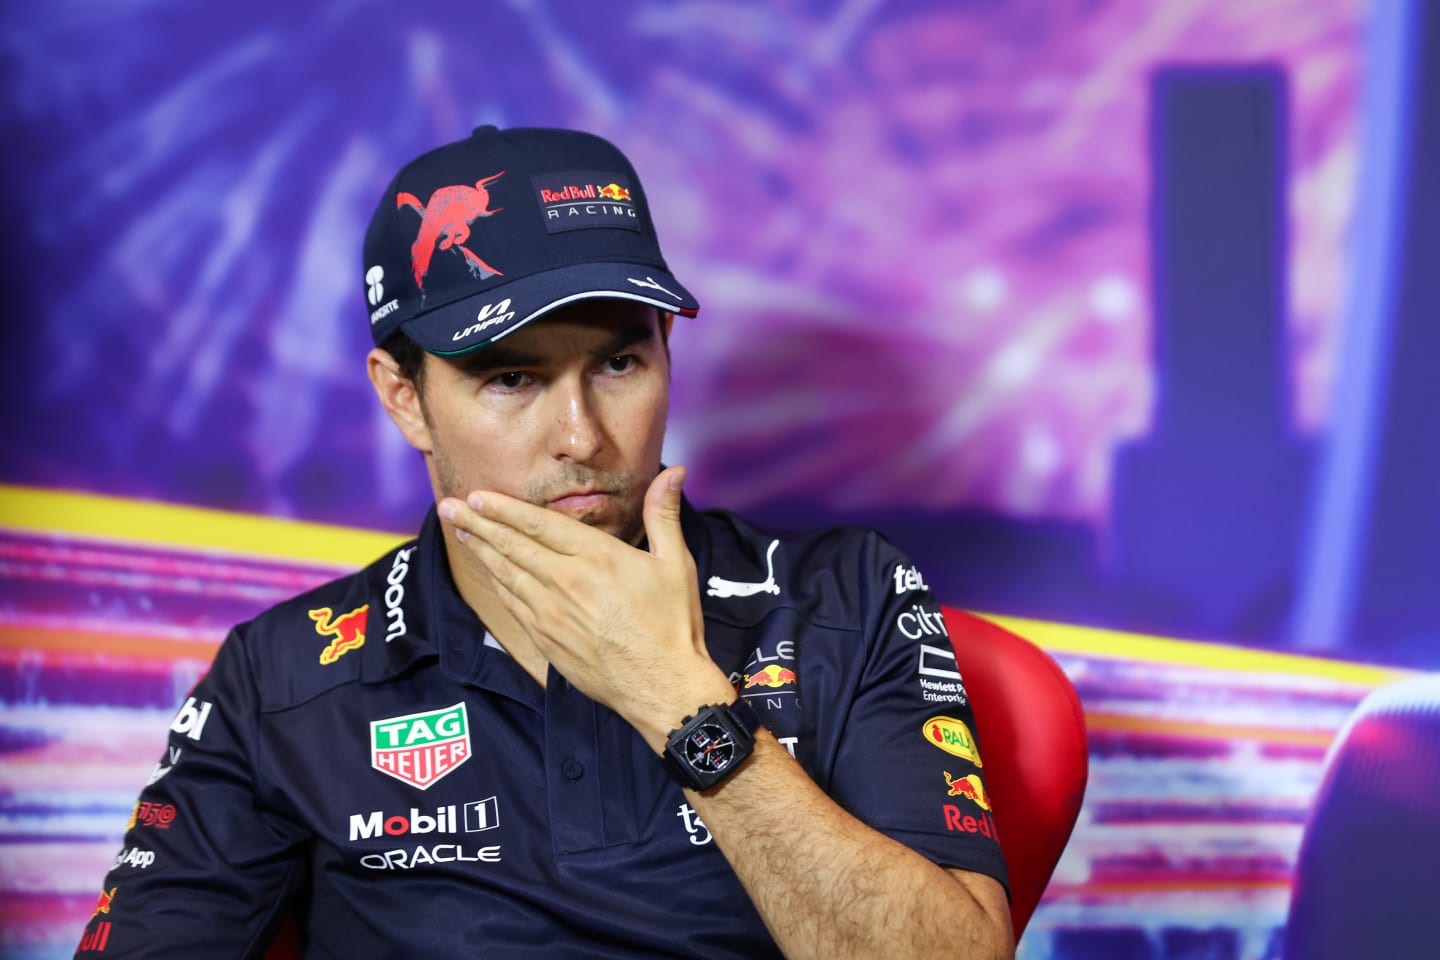 SINGAPORE, SINGAPORE - OCTOBER 01: Second placed qualifier Sergio Perez of Mexico and Oracle Red Bull Racing attends the press conference after qualifying ahead of the F1 Grand Prix of Singapore at Marina Bay Street Circuit on October 01, 2022 in Singapore, Singapore. (Photo by Dan Istitene/Getty Images)